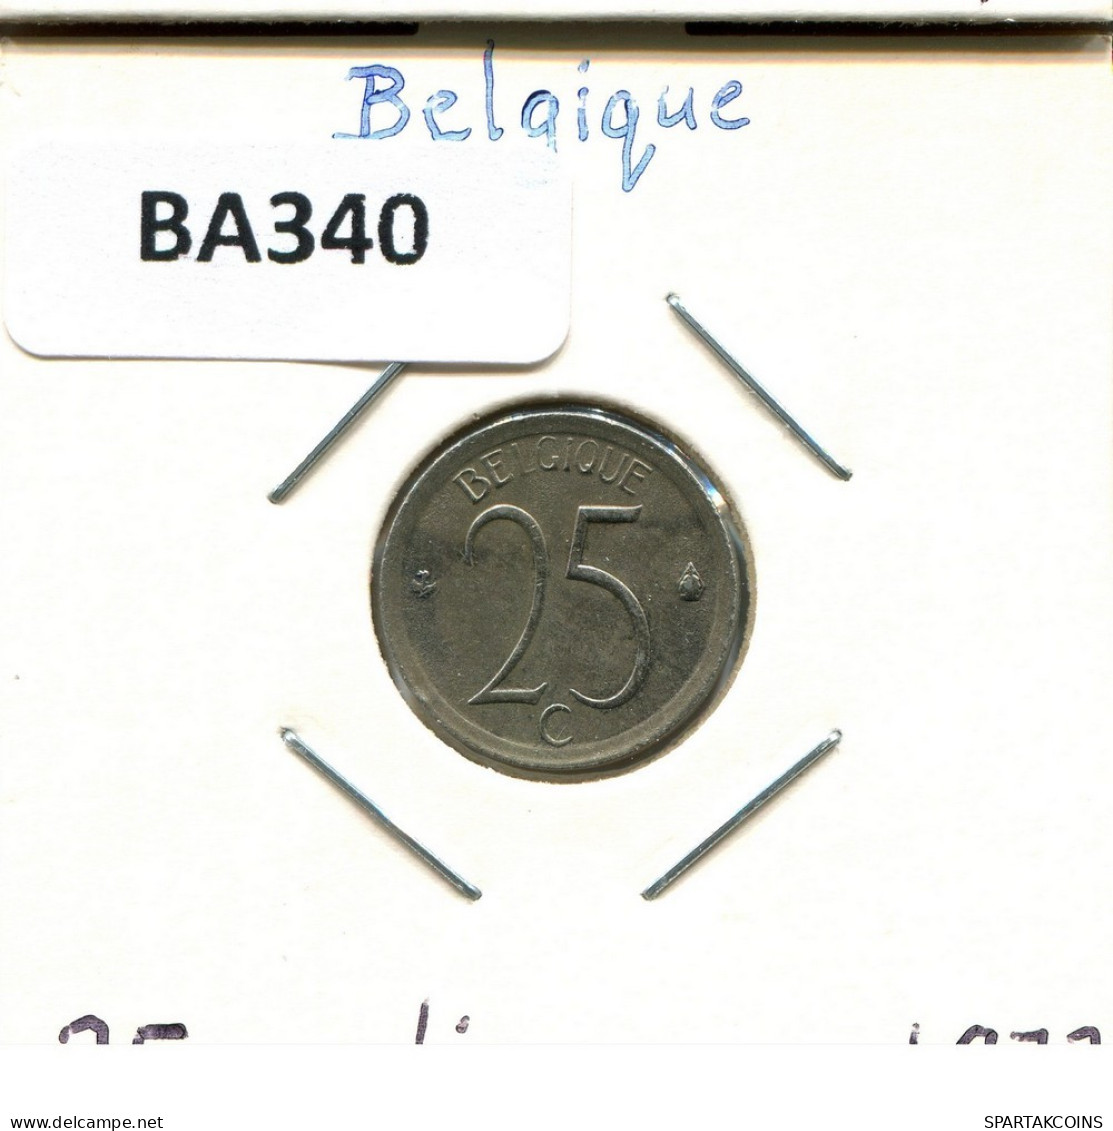 25 CENTIMES 1973 FRENCH Text BELGIUM Coin #BA340.U.A - 25 Centimes